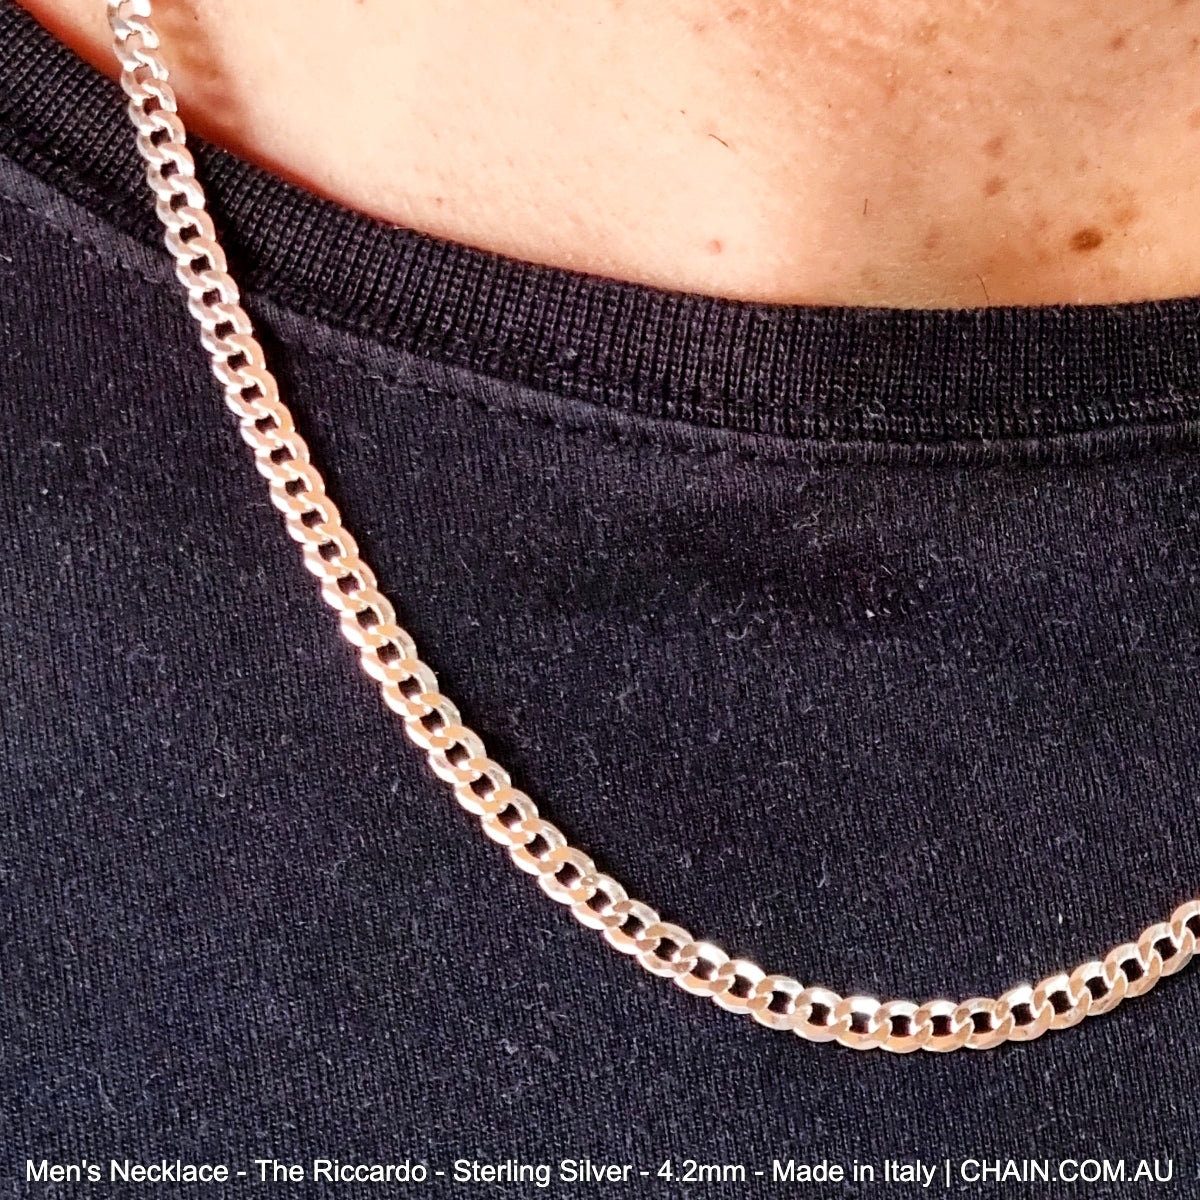 Men's Chain Necklace - The Riccardo - Sterling Silver - 4.2mm - Made in Italy. Australia wide shipping. Shop jewellery chain chain.com.au